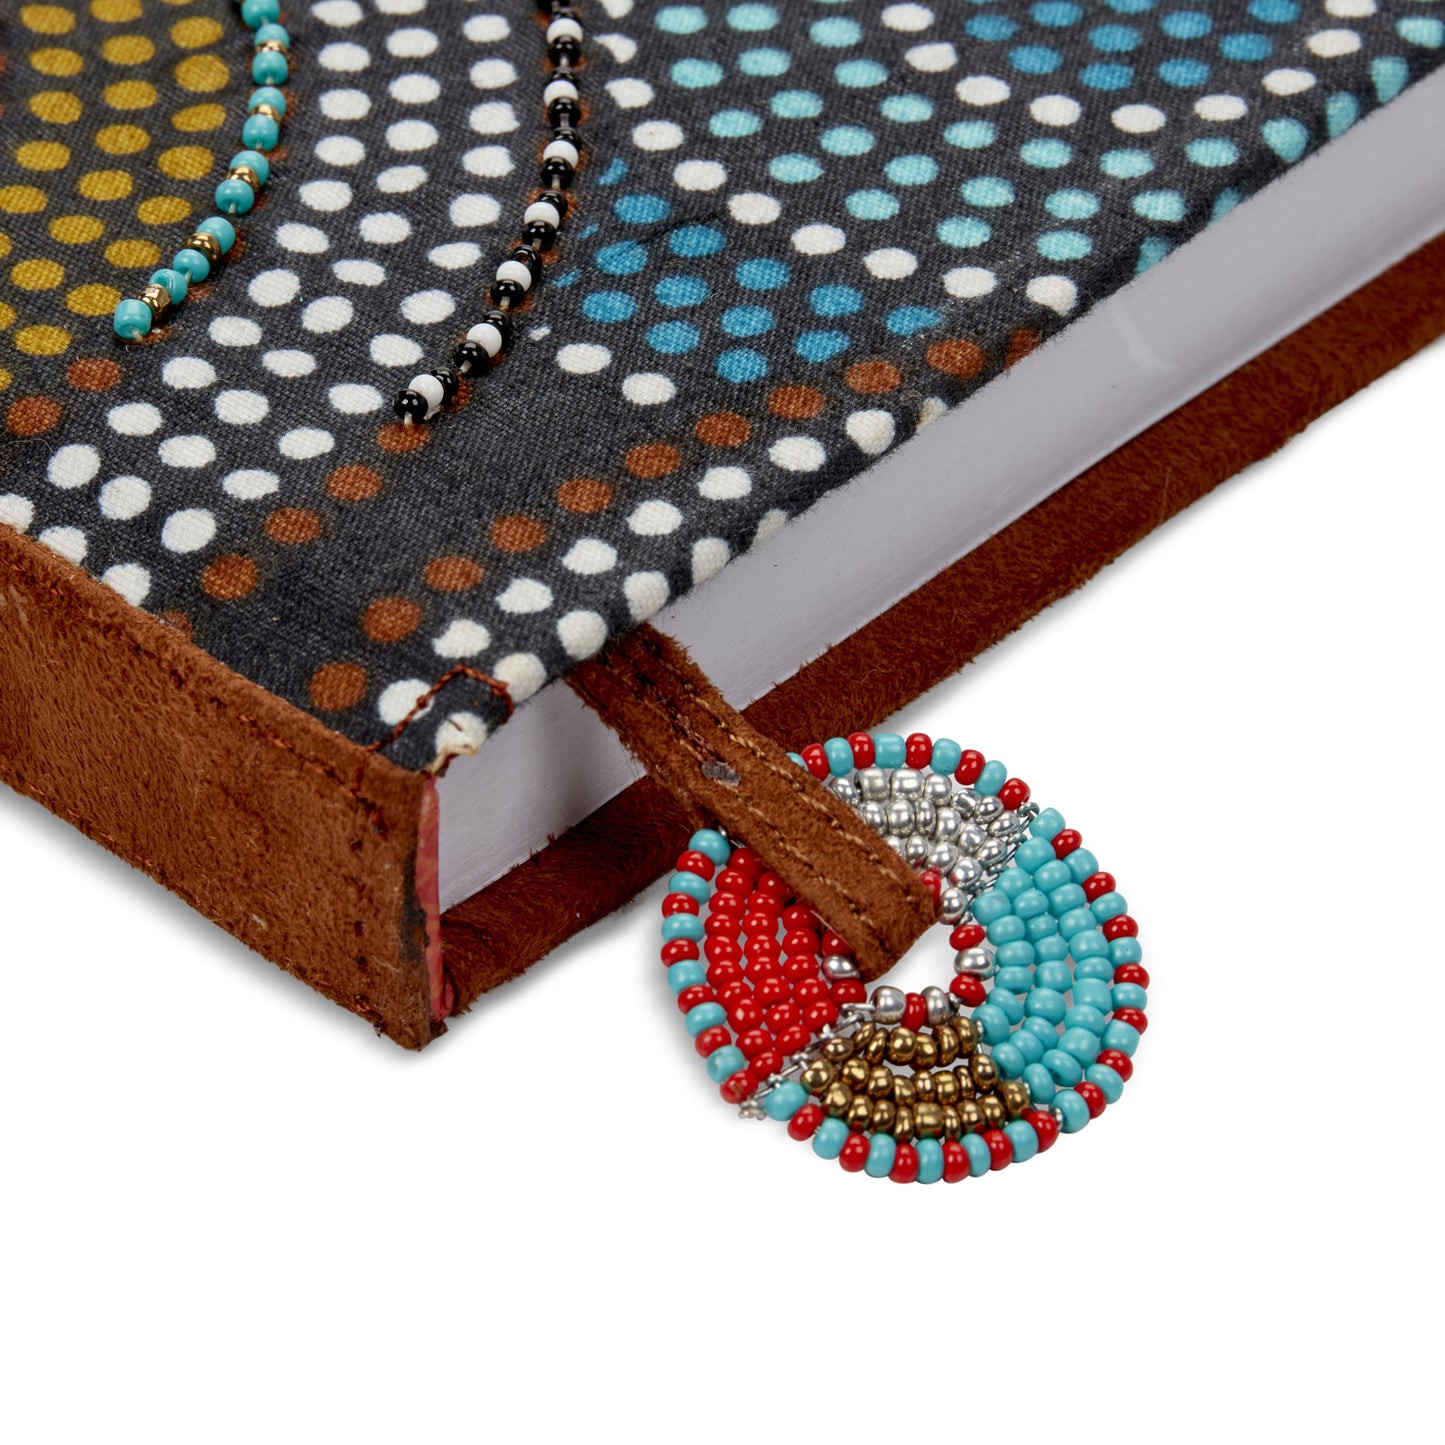 Notebook Wrapped in Kitenge Fabric, Medium- "Elements"